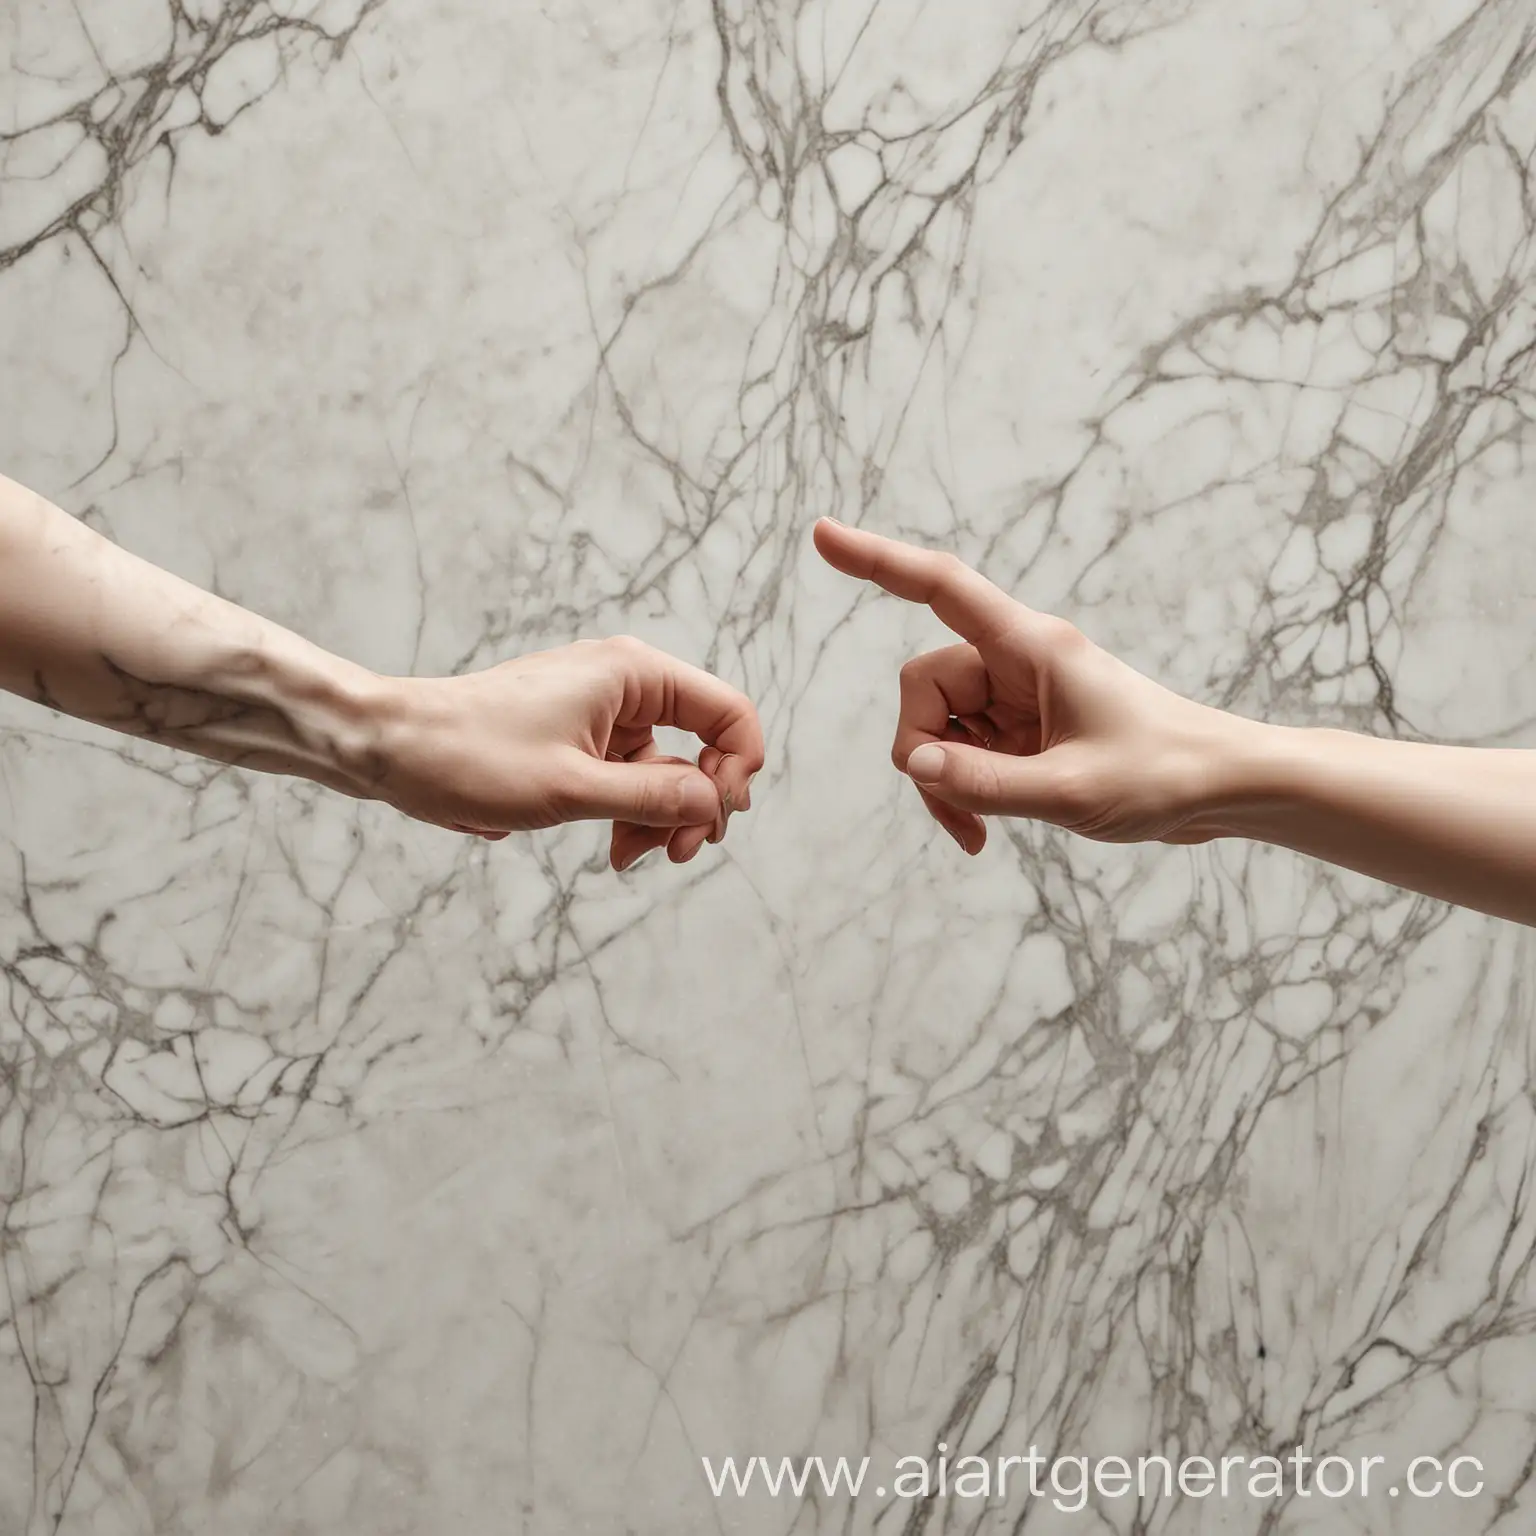 Interlocked-Marble-Hands-Reaching-Out-in-Connection